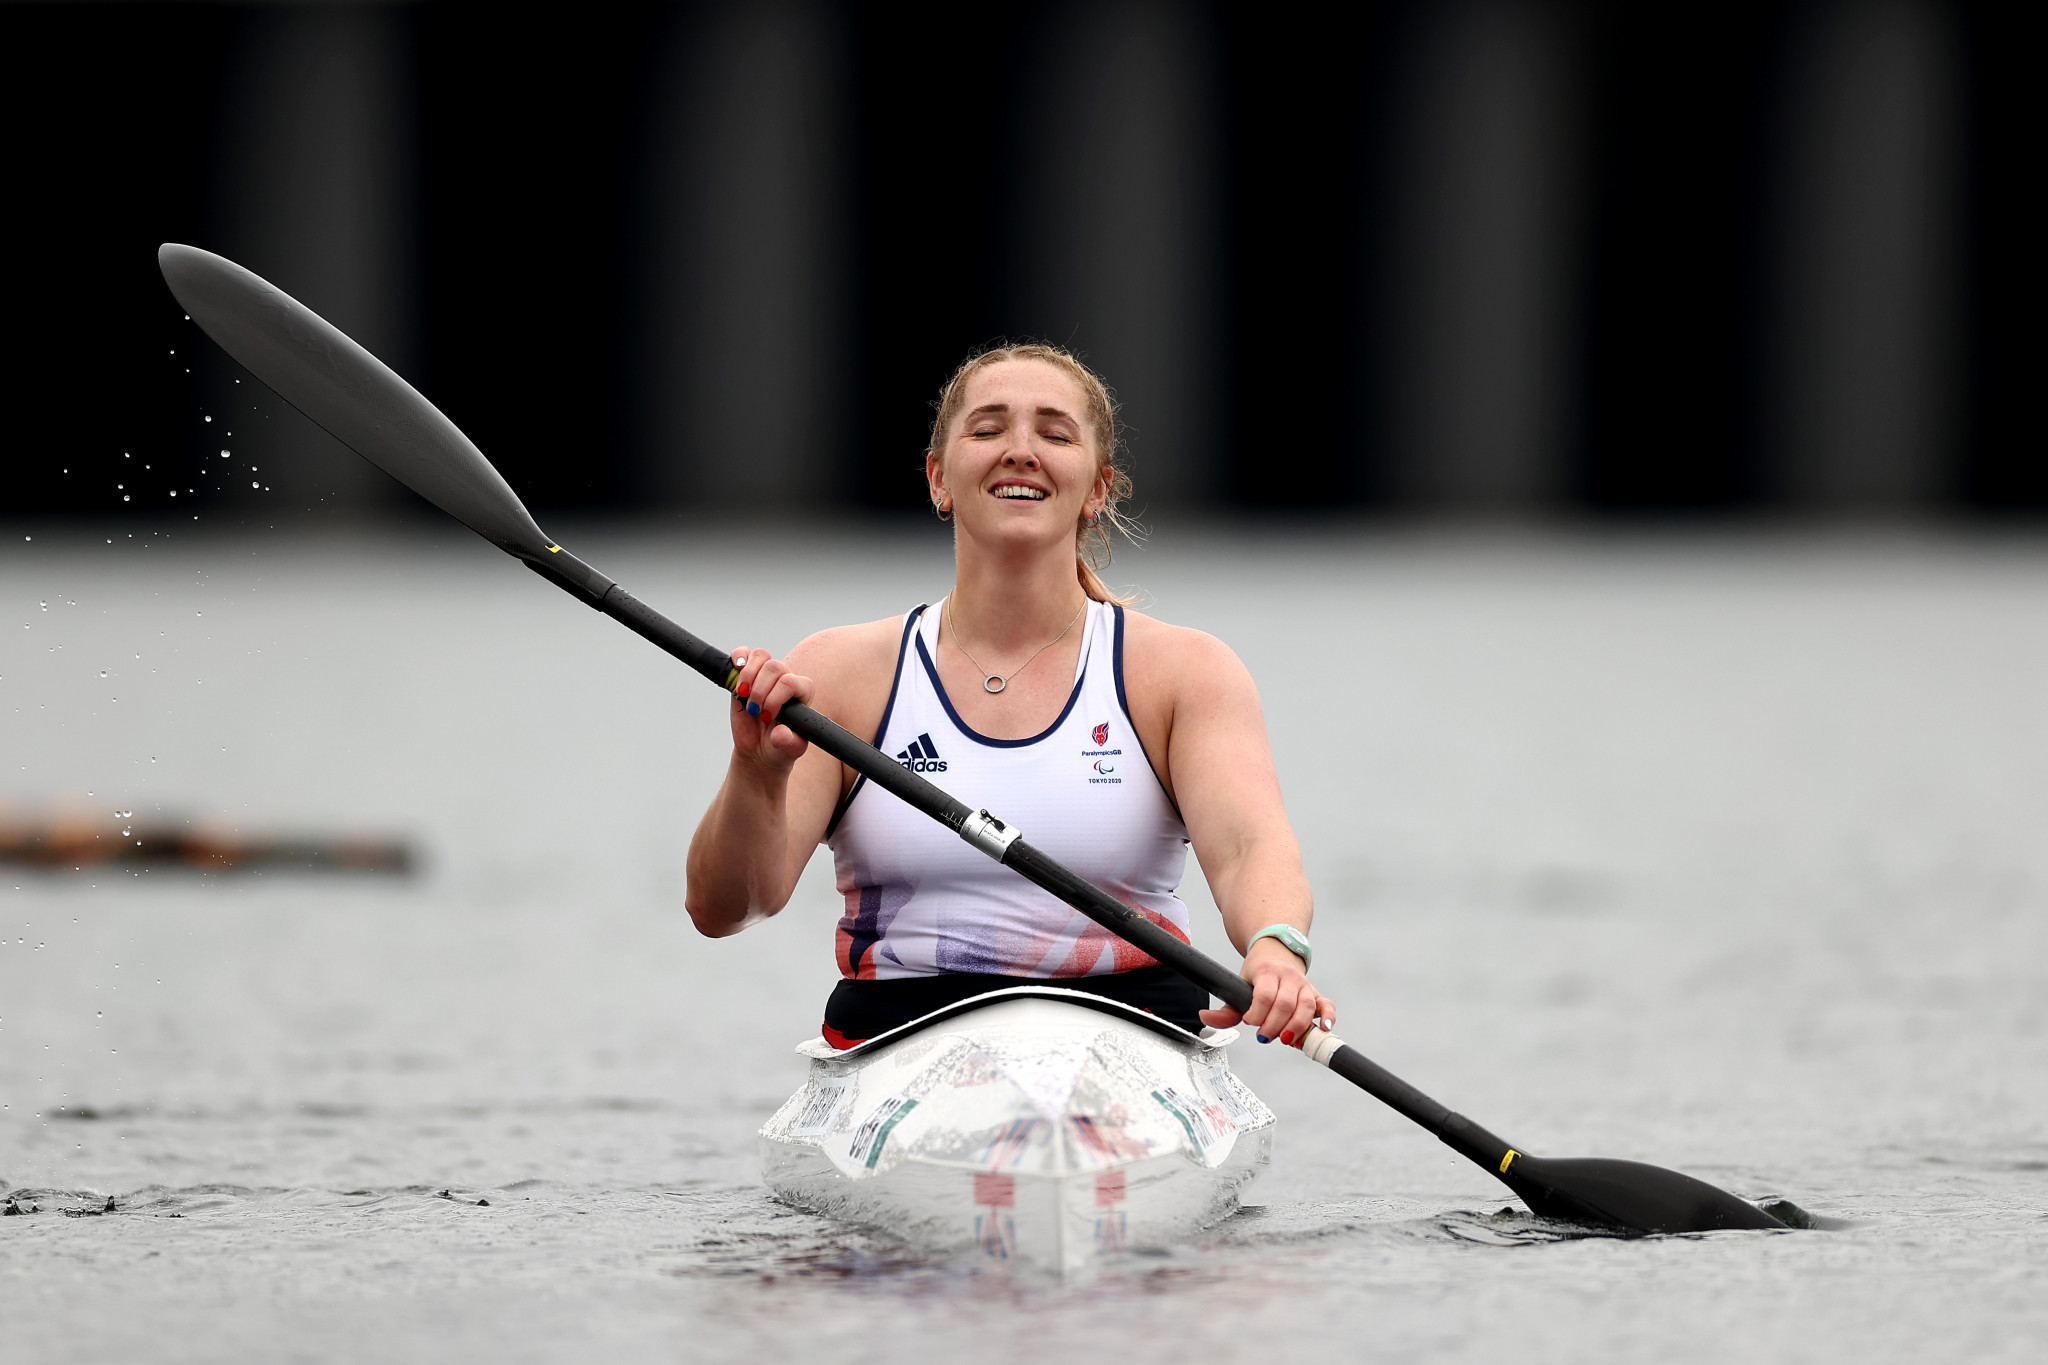 Paralympic gold medallist Henshaw retains women's VL3 title at ICF Para Canoe World Championships